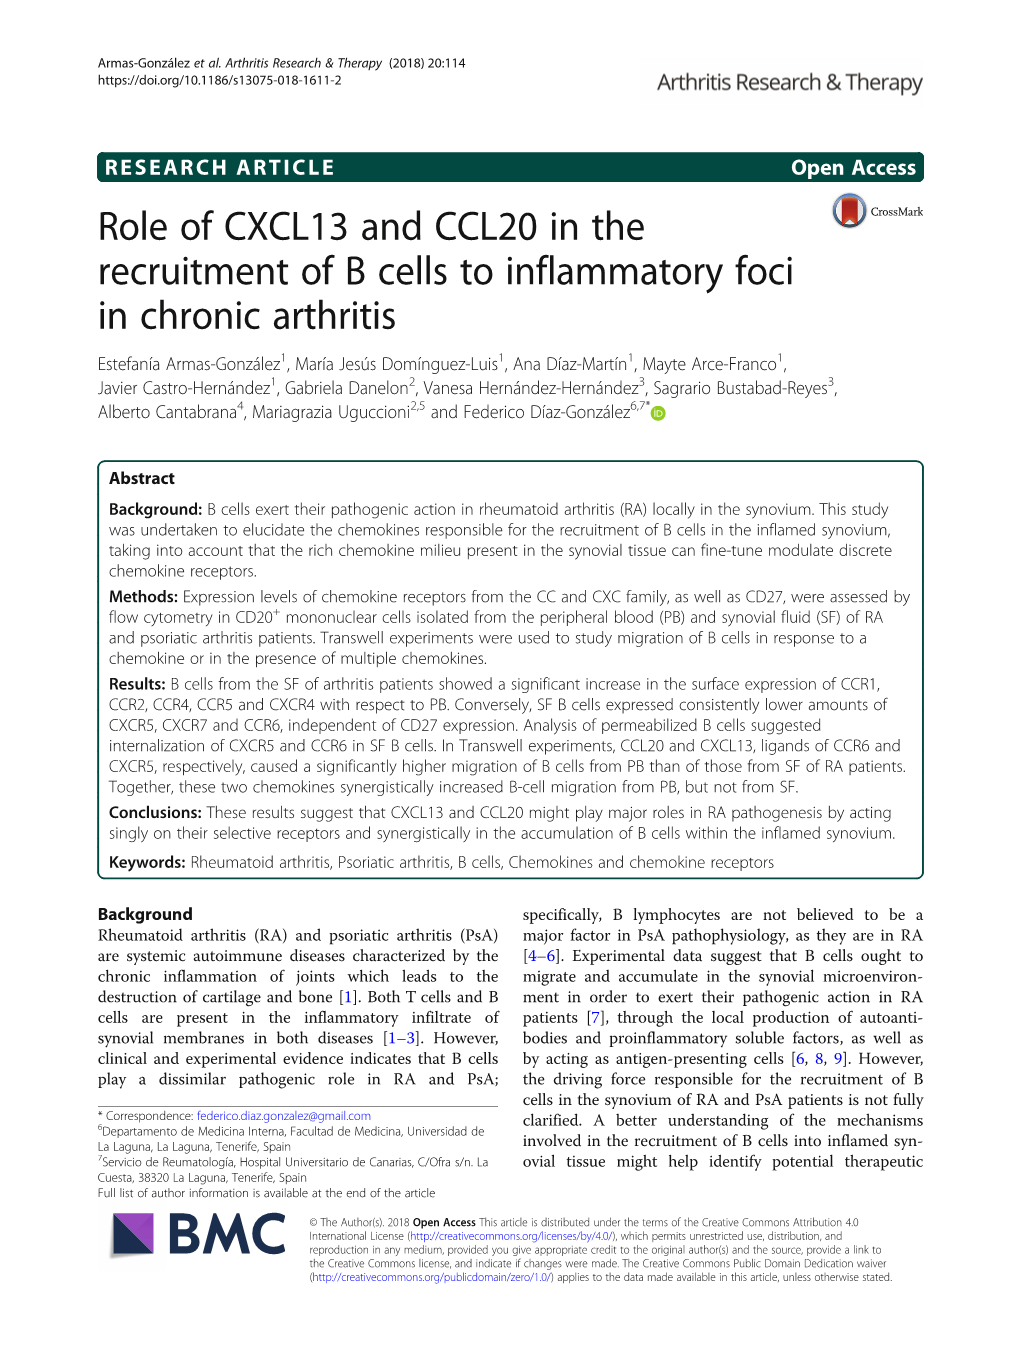 Role of CXCL13 and CCL20 in the Recruitment of B Cells to Inflammatory Foci in Chronic Arthritis